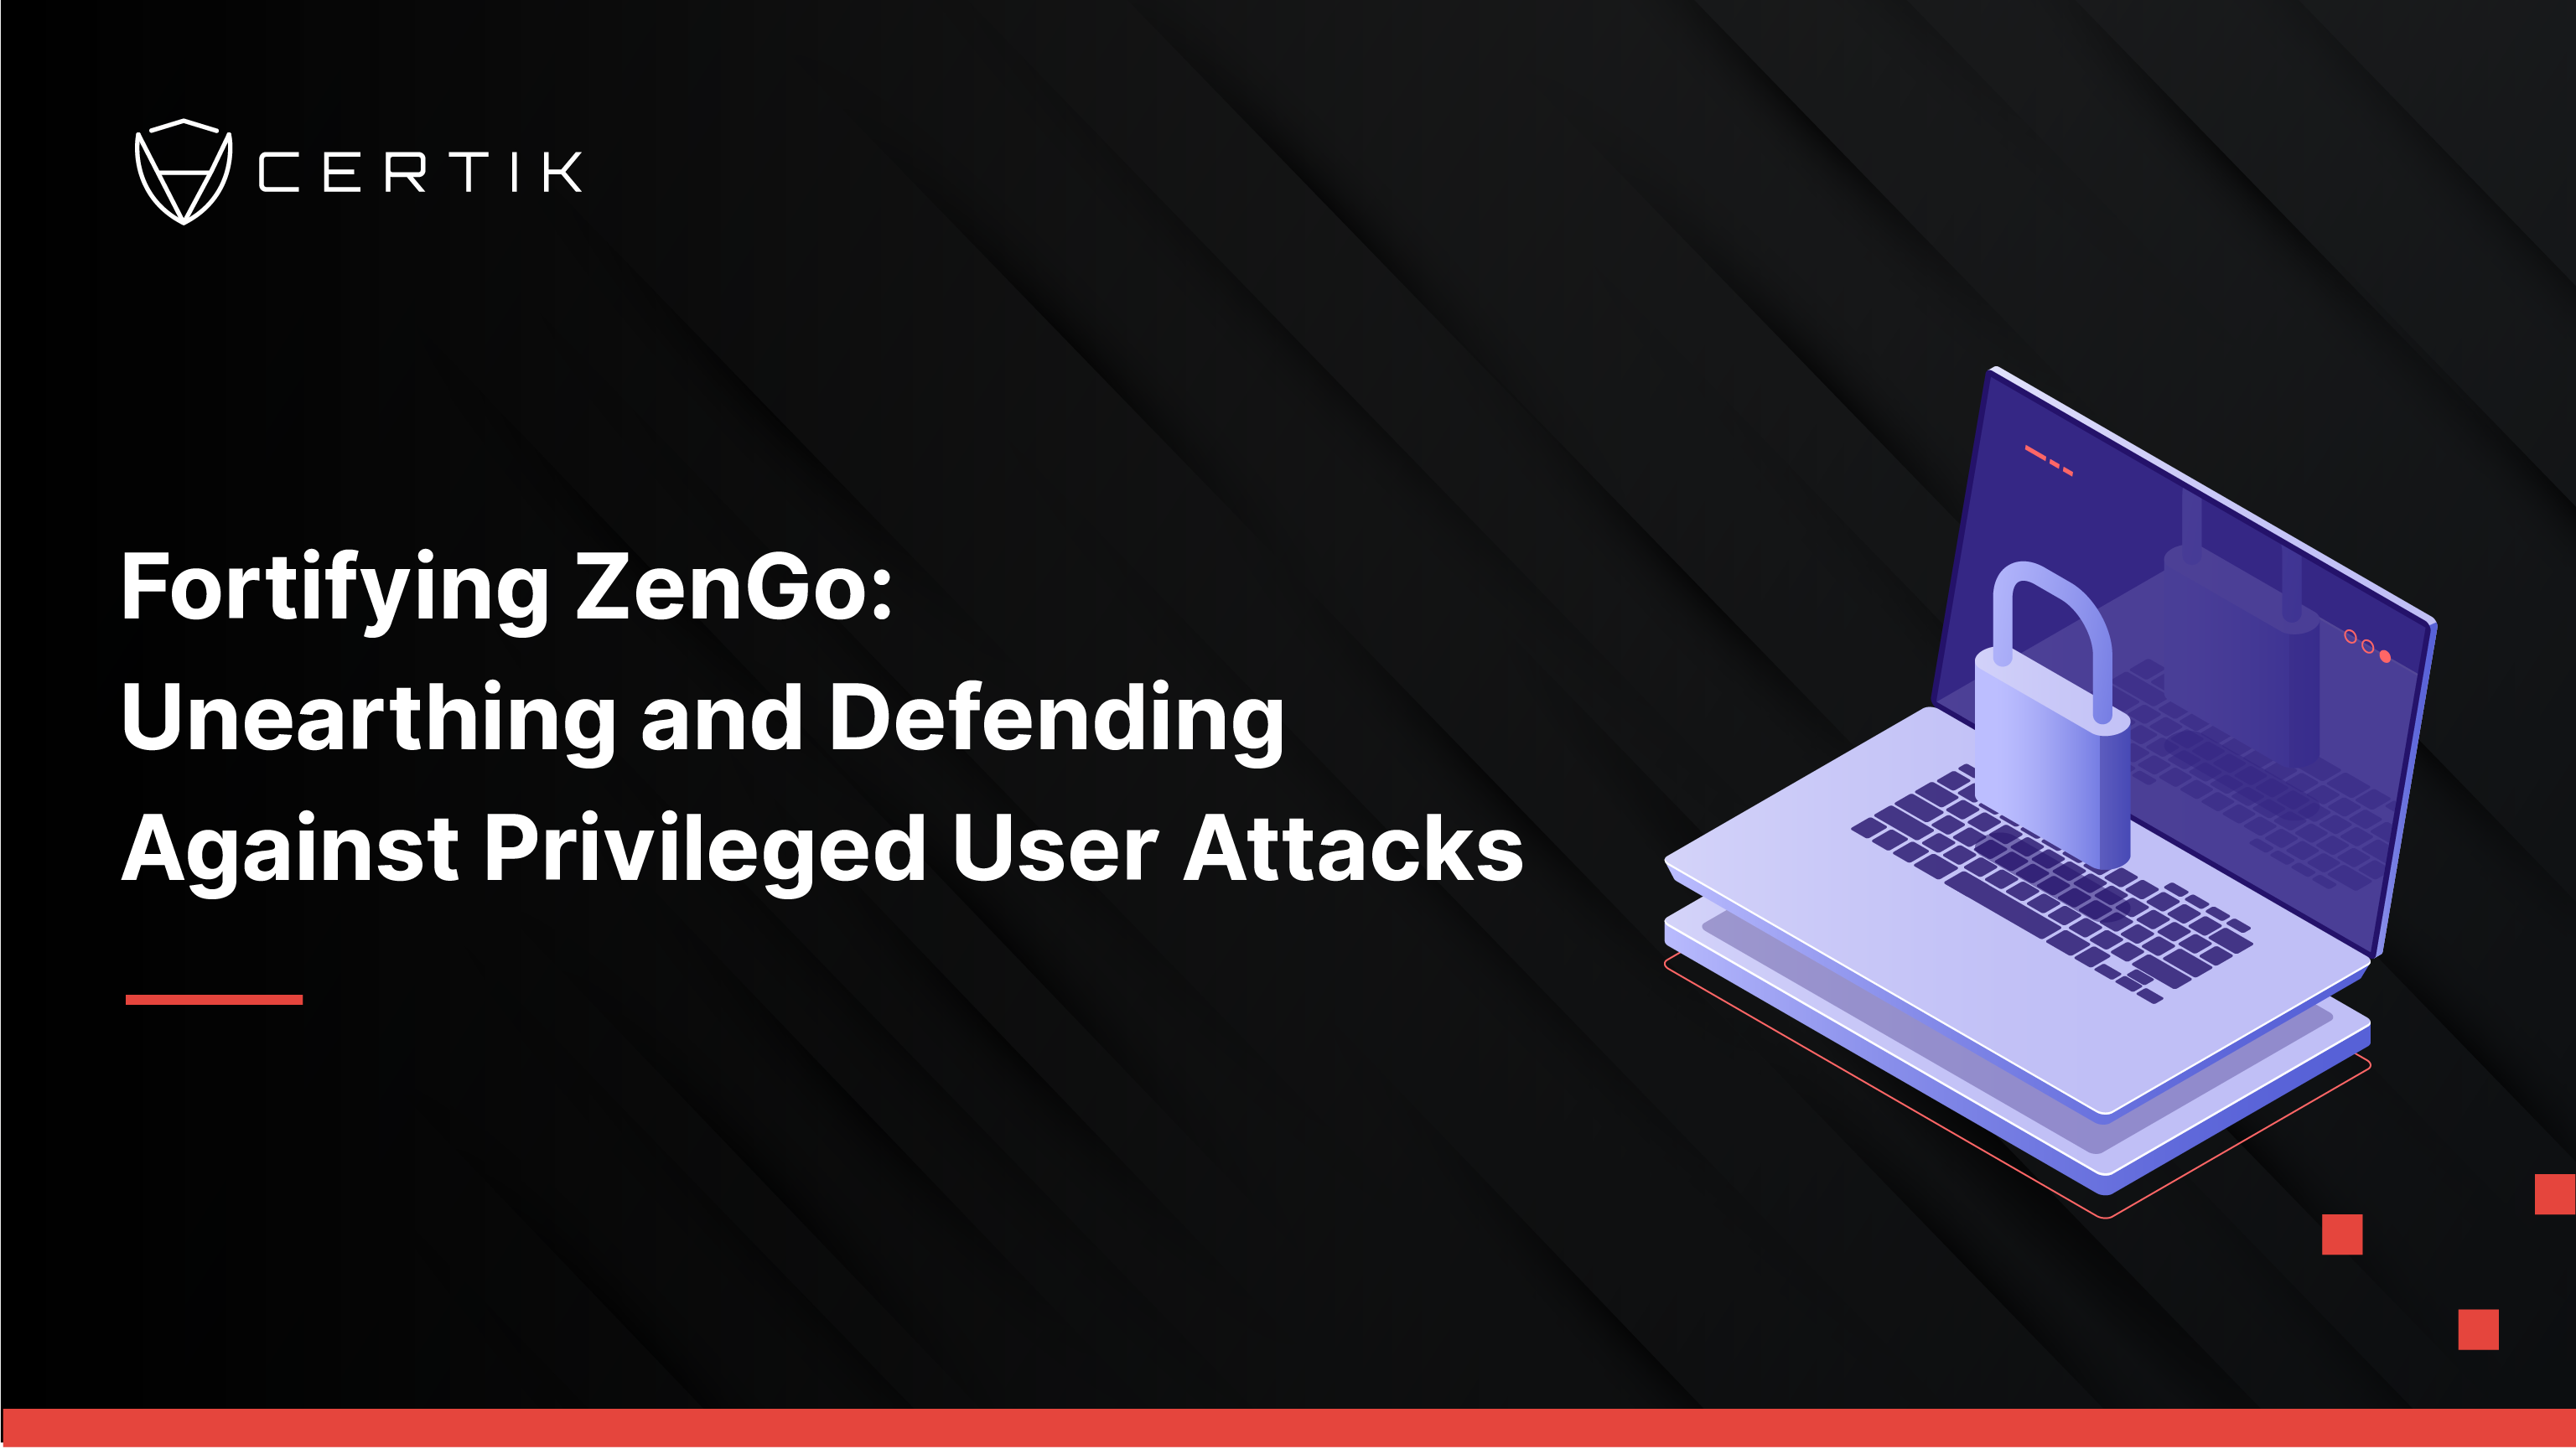 Fortifying ZenGo: Unearthing and Defending Against Privileged User Attacks 